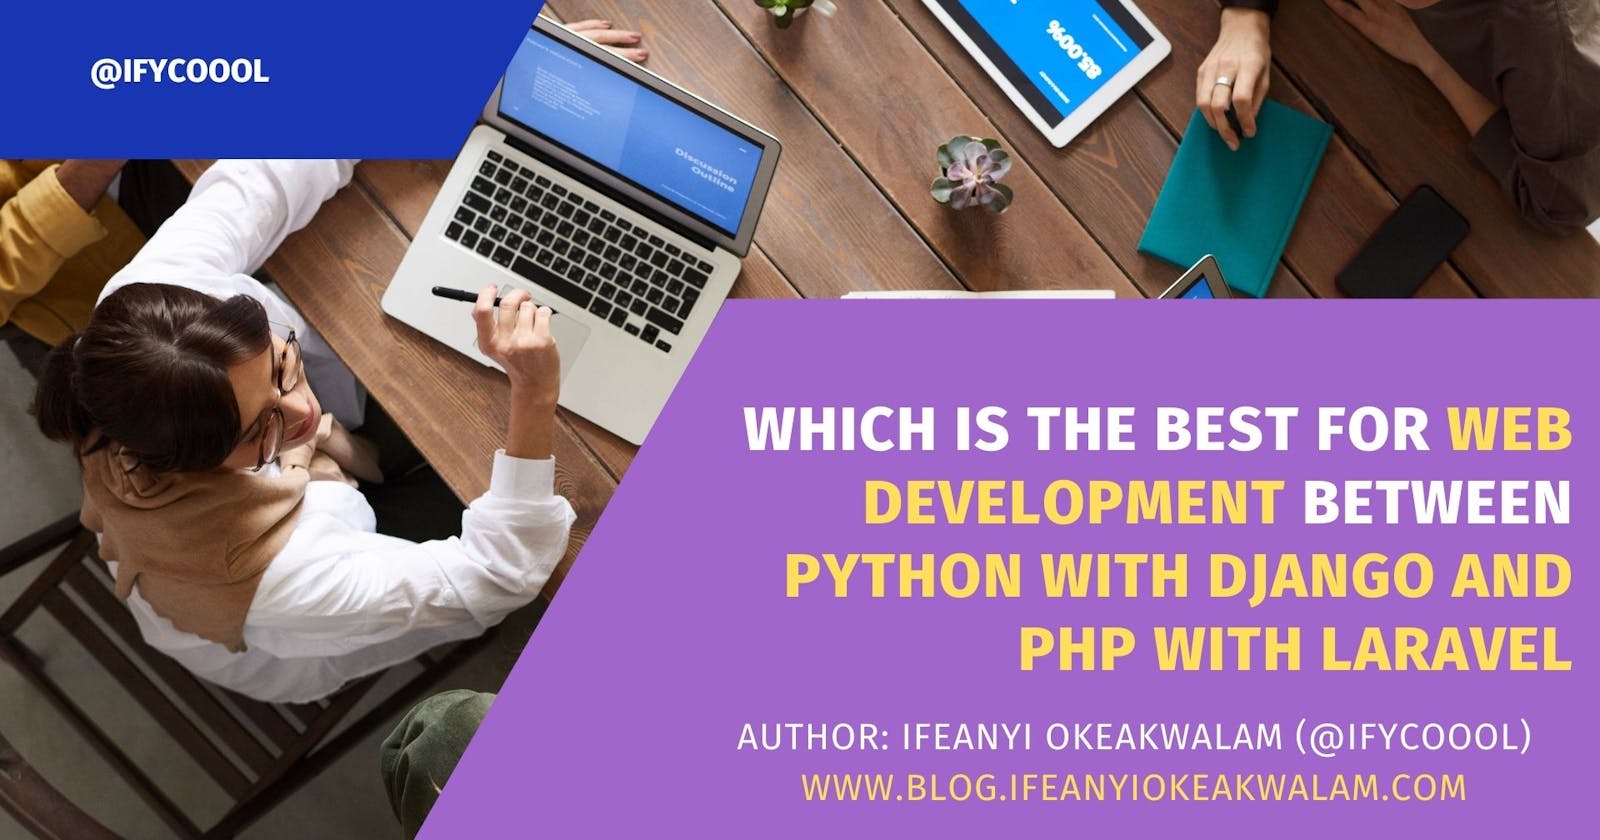 Which is the best for Web development between Python with Django and PHP with Laravel